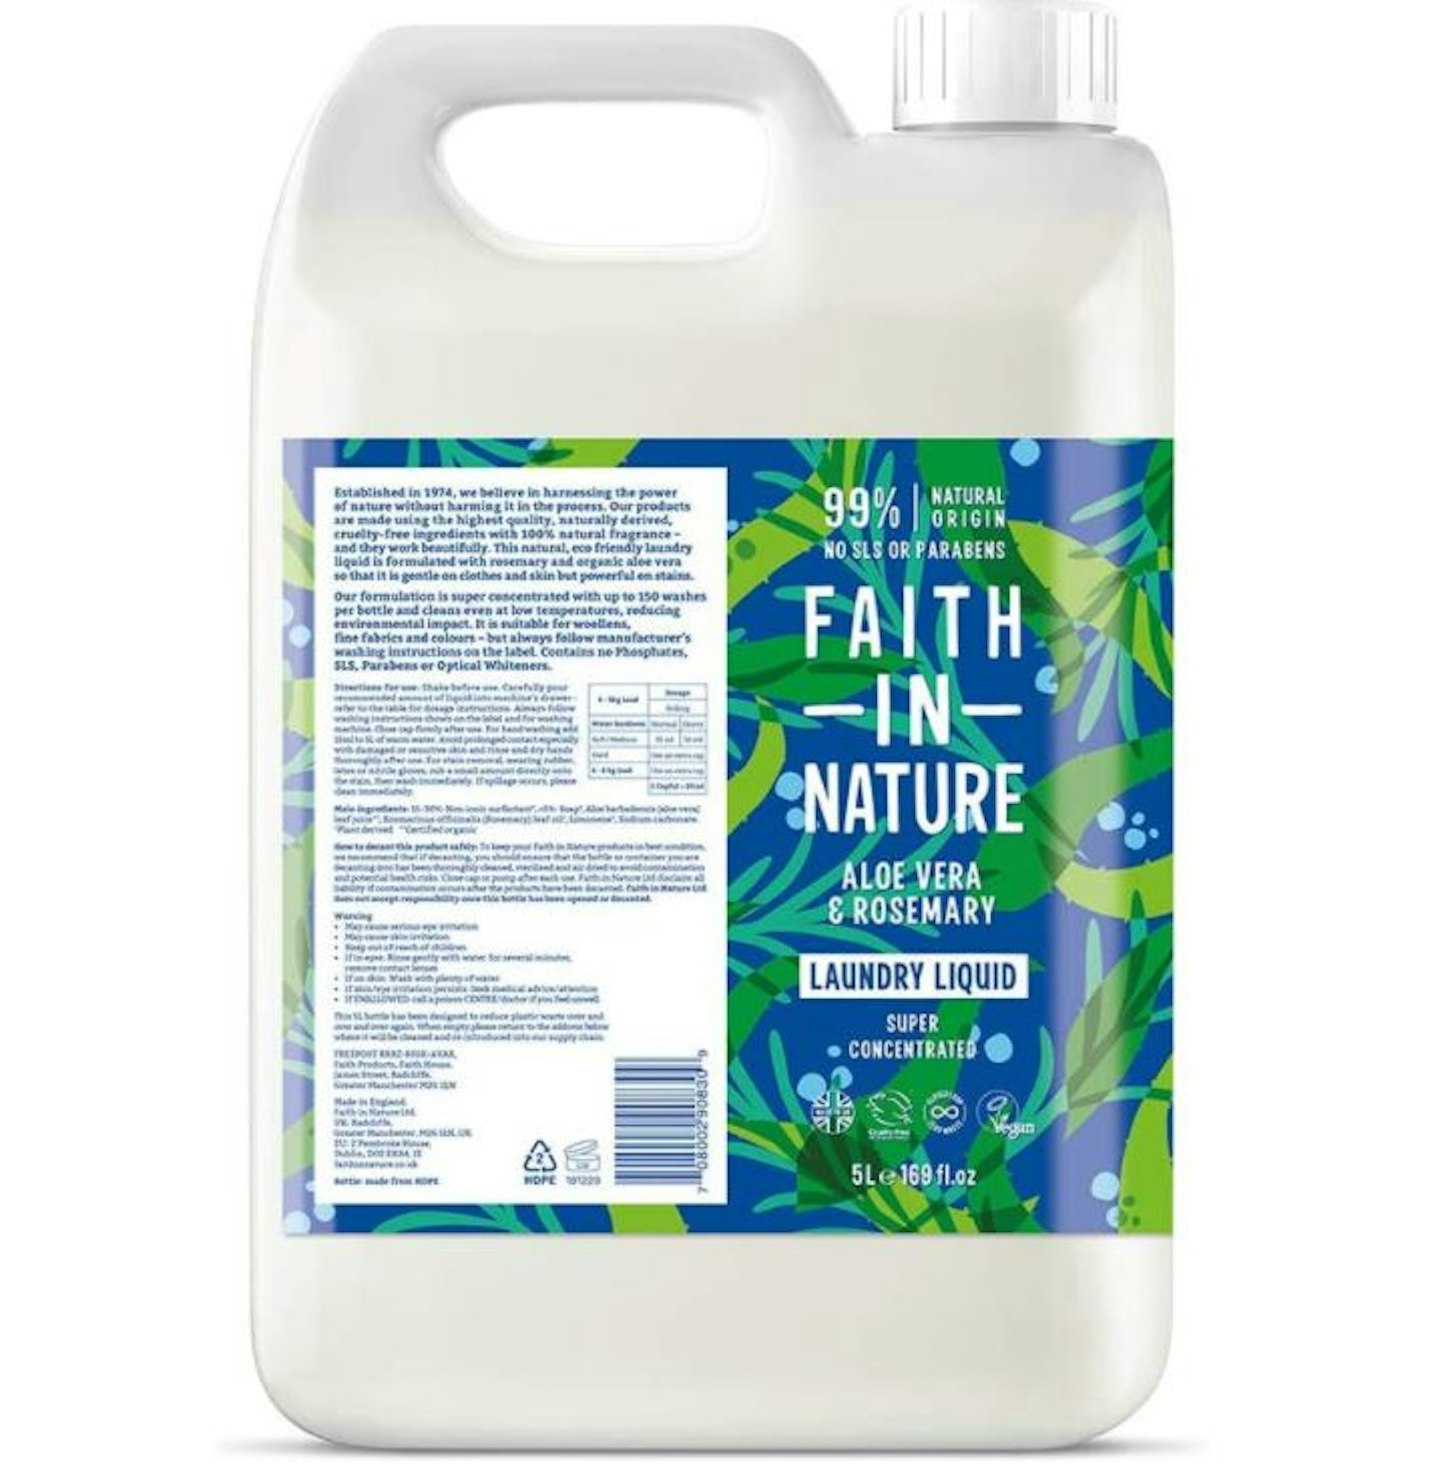 Faith in Nature Super Concentrated Laundy Liquid